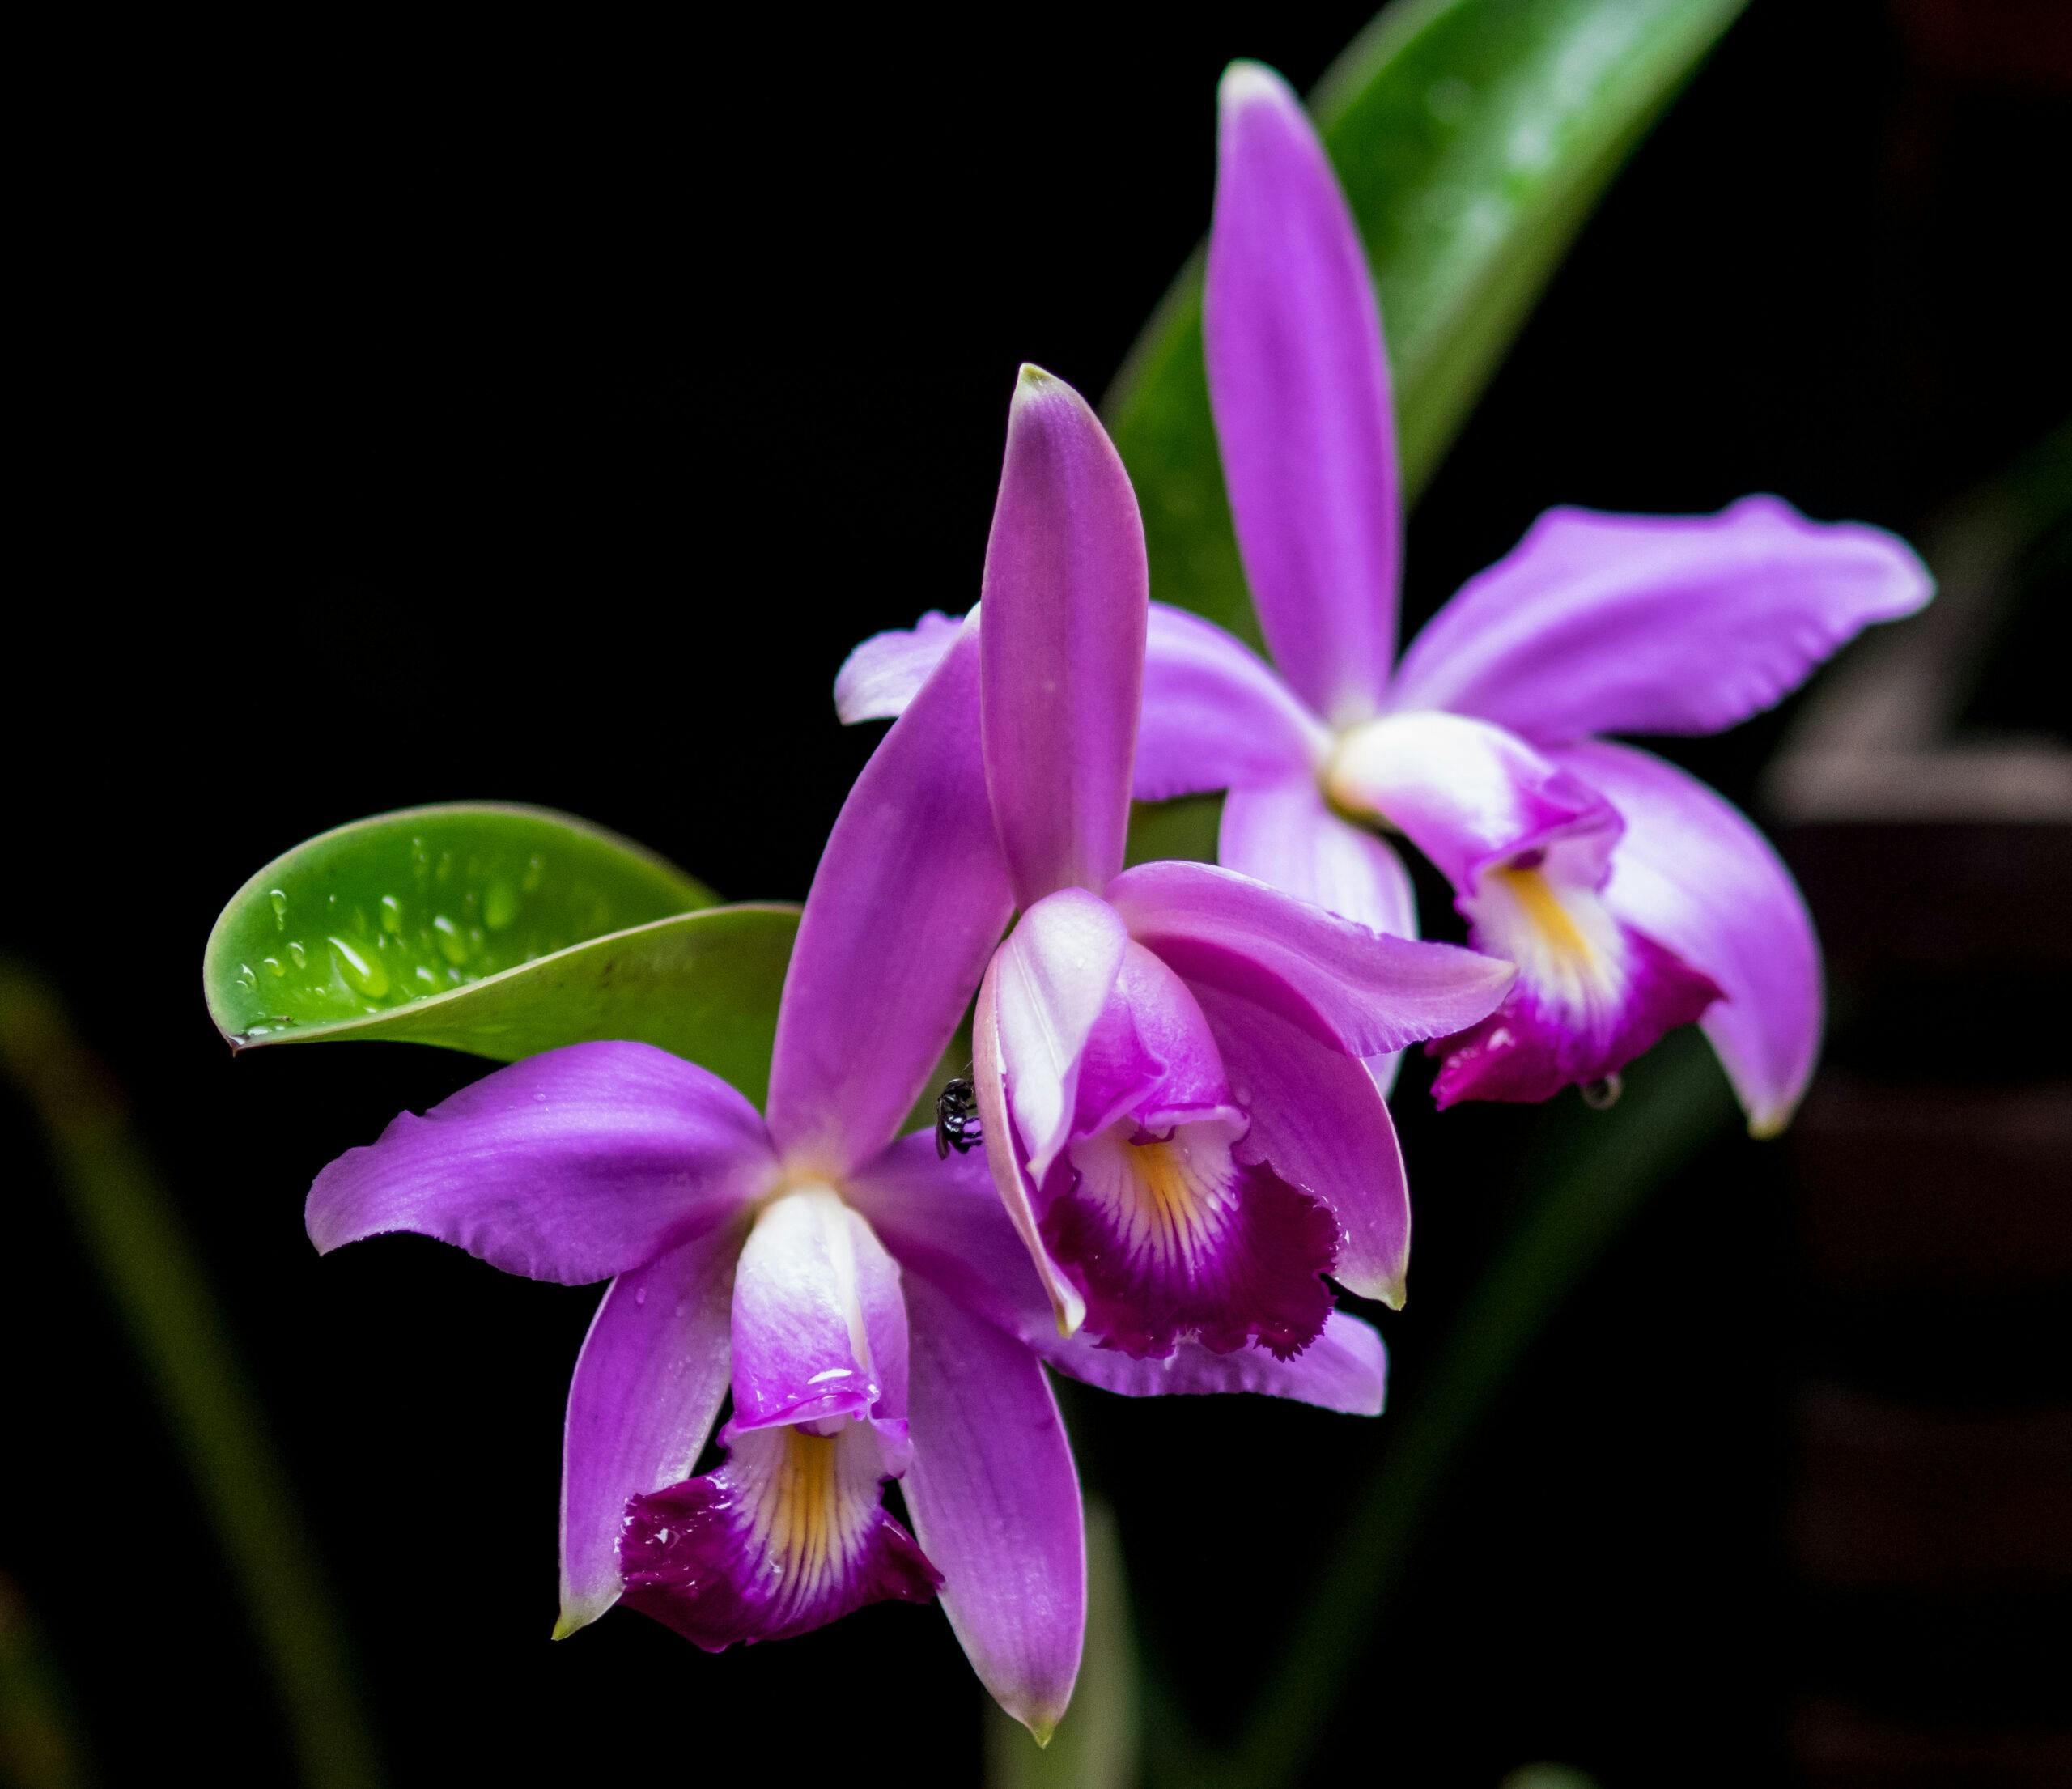 The purple coloured Cattleya eldorado is typically found in the Rio Negro basin, mainly within the Brazilian state of Amazonas. It is native of the Amazon region, usually flowers once a year, once the rainy season starts.